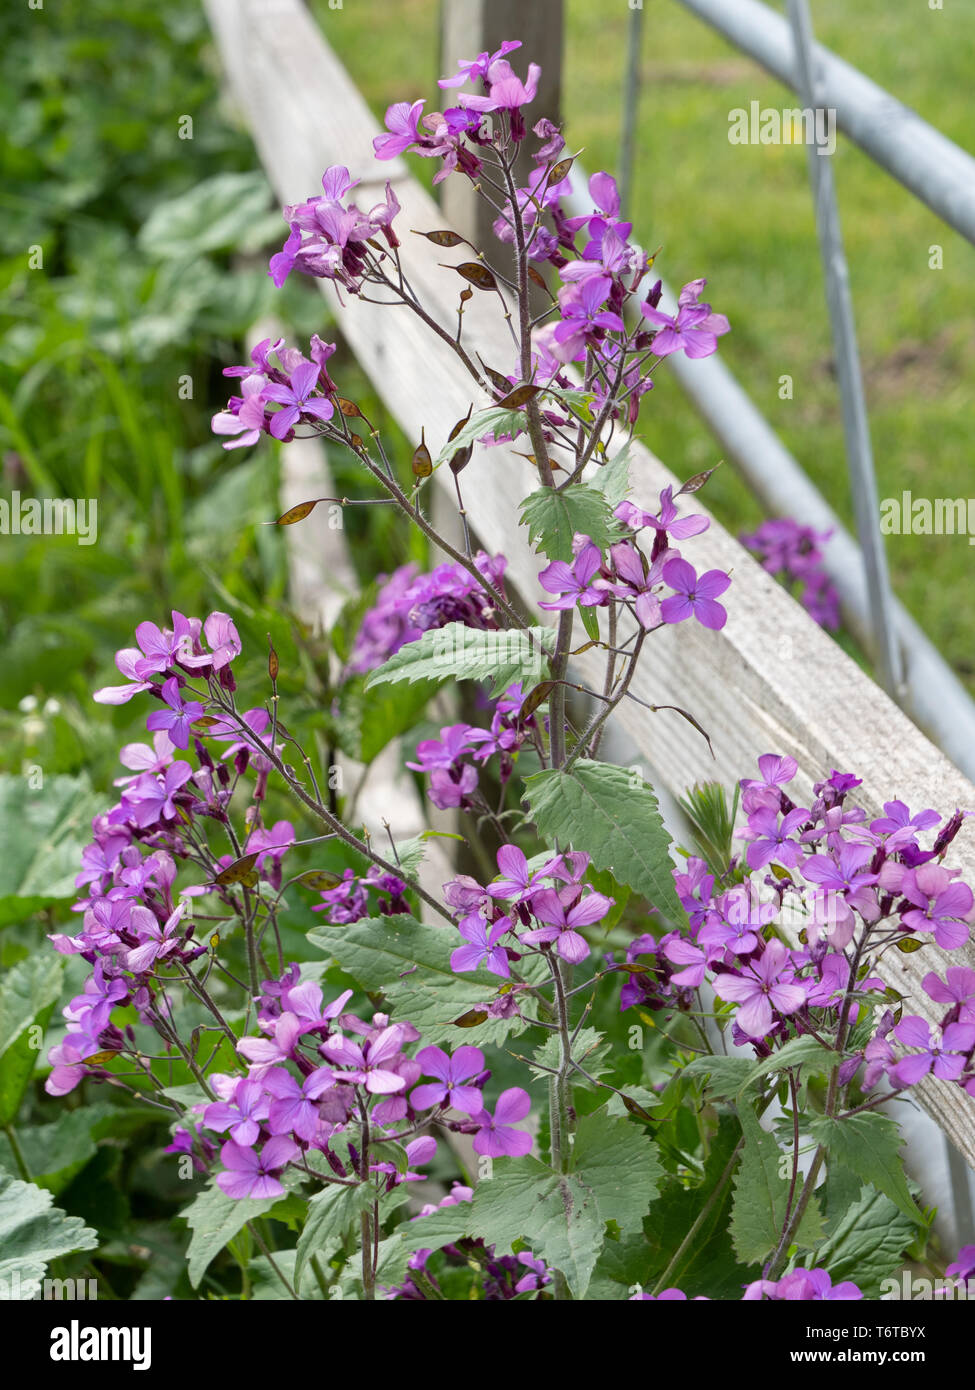 A lovely example of 'Honesty' also known as Annual Honesty or Moneyplant. (Lunaria annua). Growing by farmland in Wiltshire, UK. Stock Photo